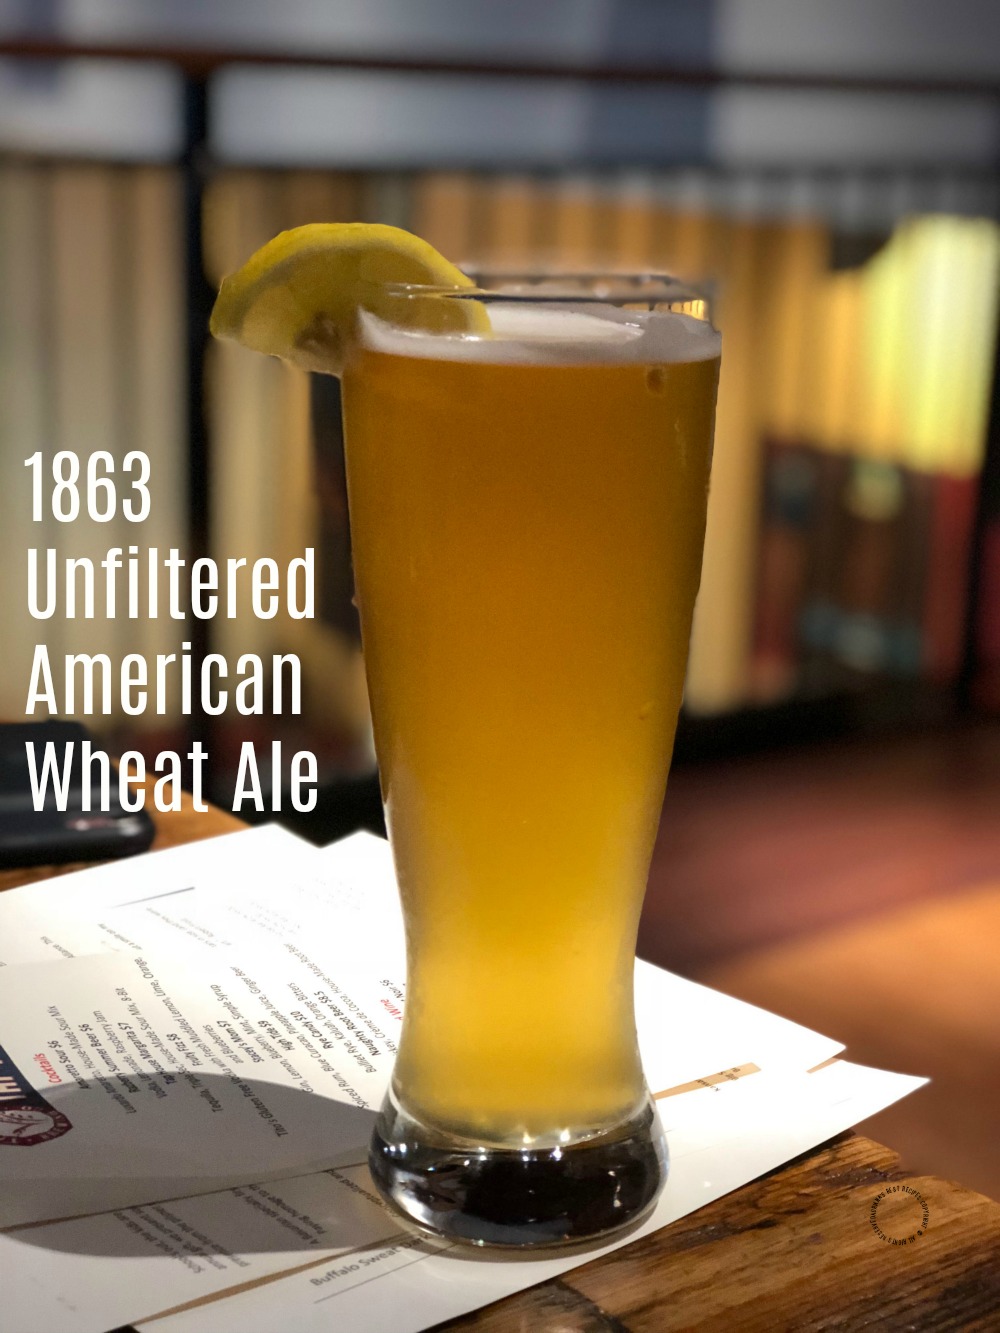 1863 Unfiltered American Wheat Ale